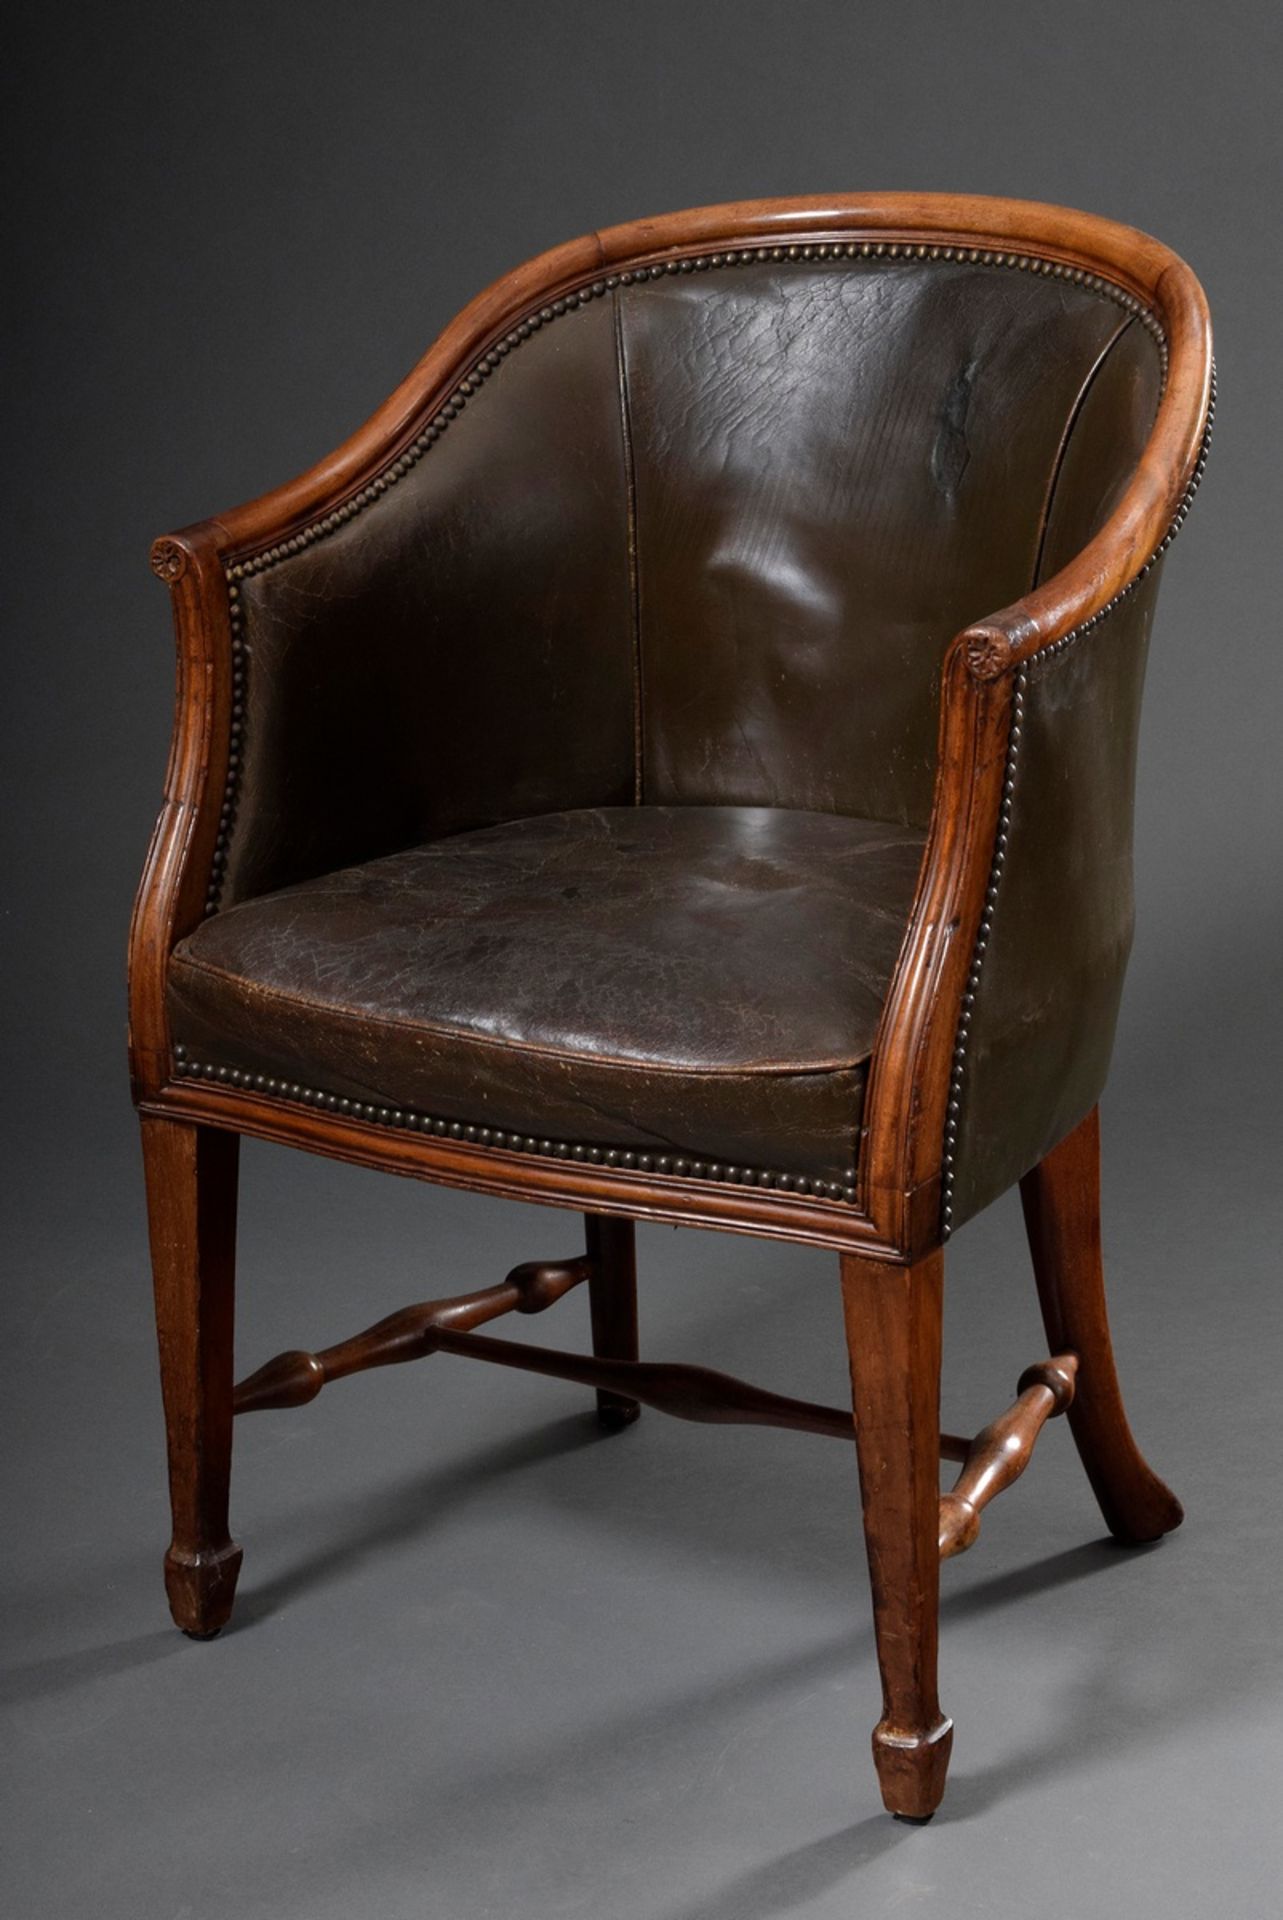 English "Tub Chair" with finely carved mahogany frame and original green leather upholstery, Englan